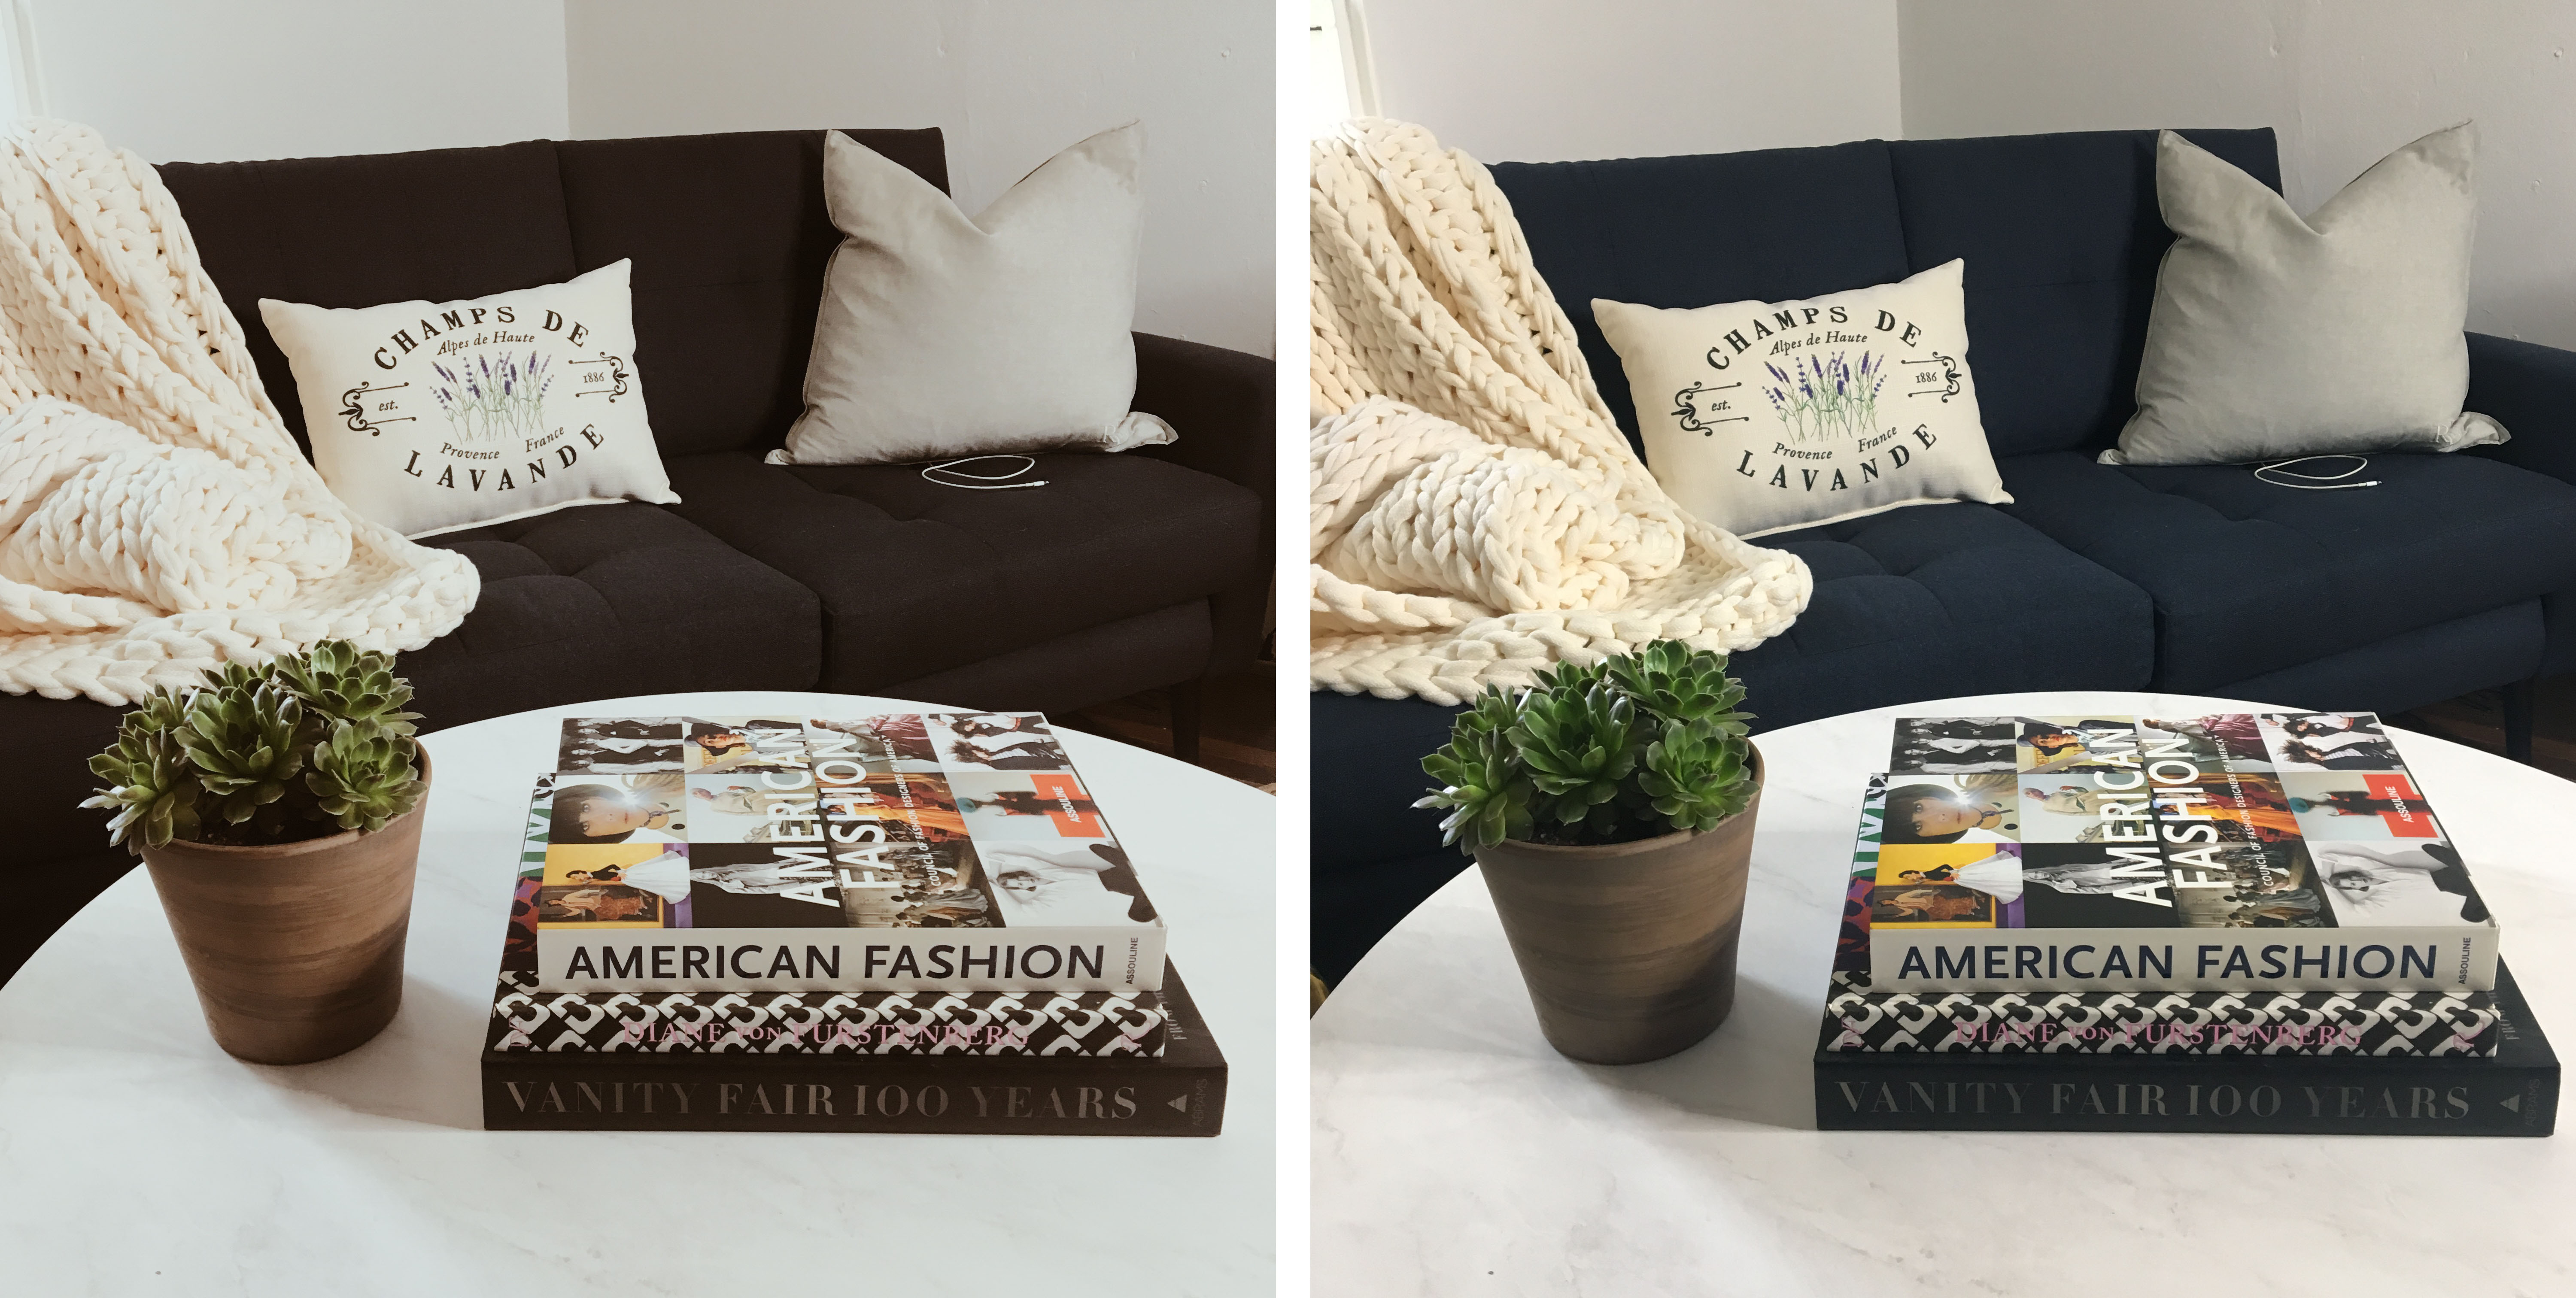 Burrow Couch Simply by Simone-coffee table books-succulent